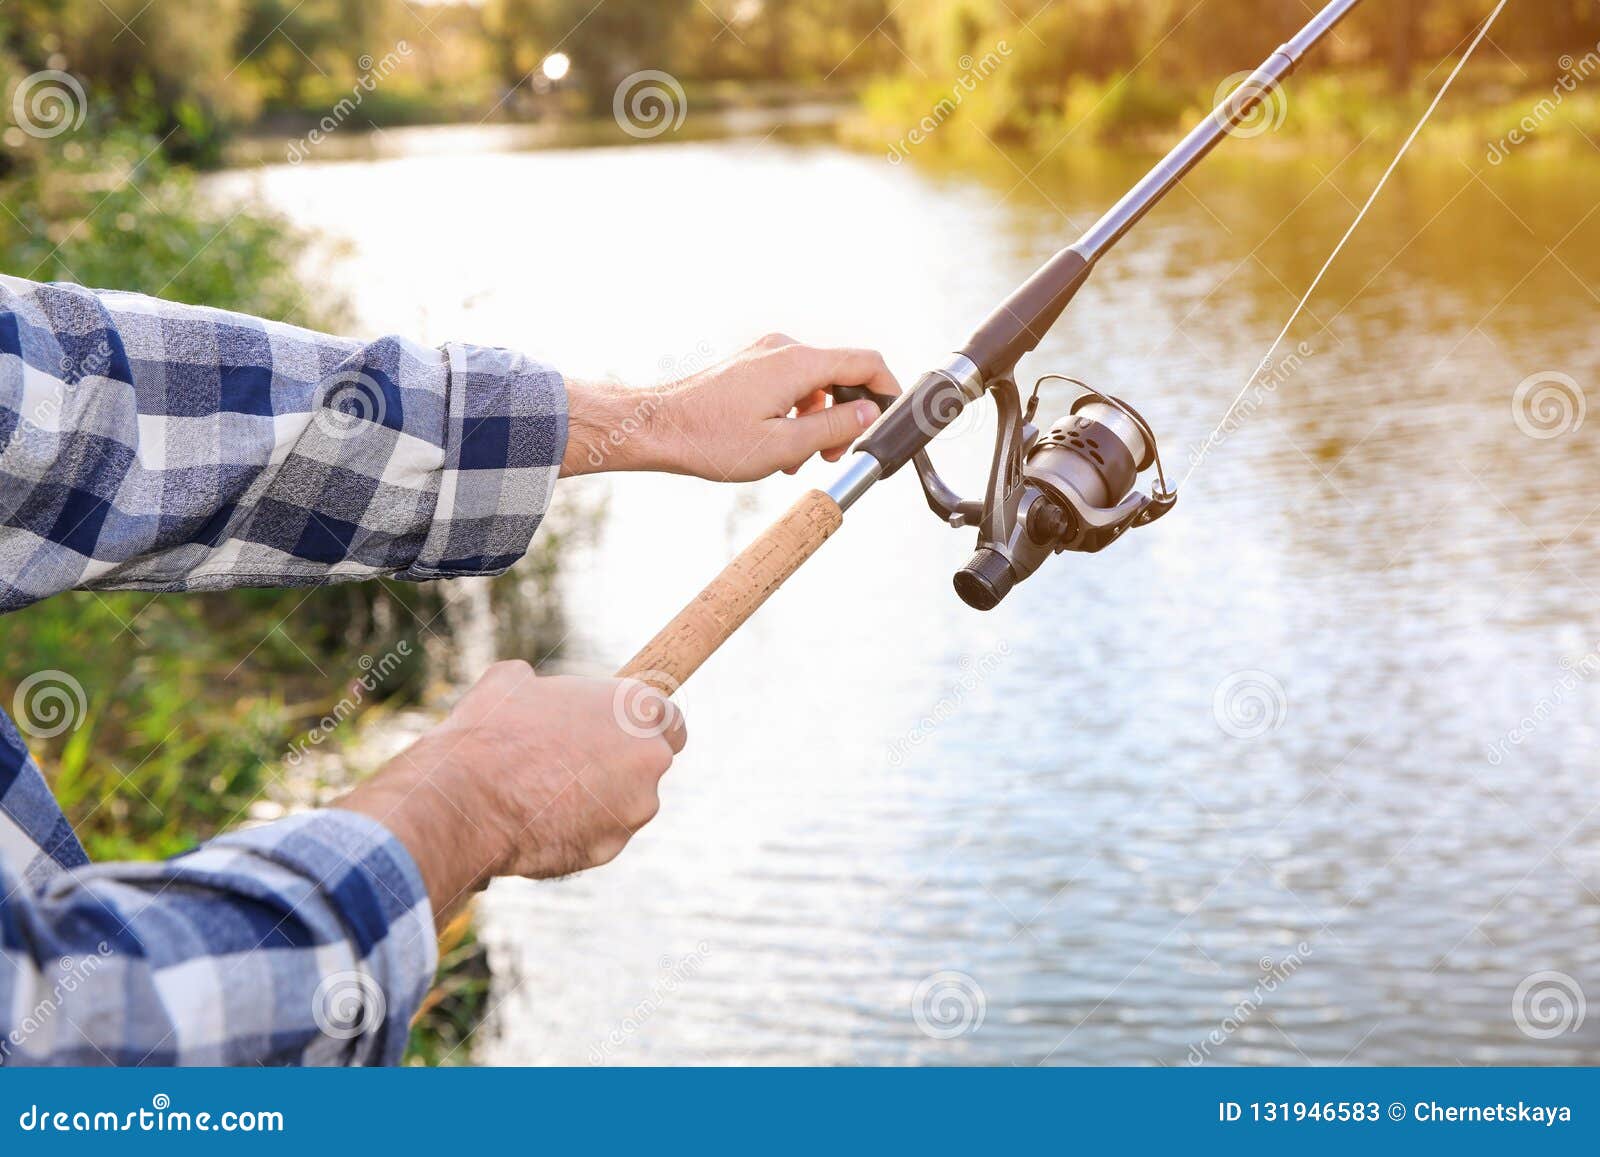 Man with Rod Fishing at Riverside, Focus on Hands Stock Image